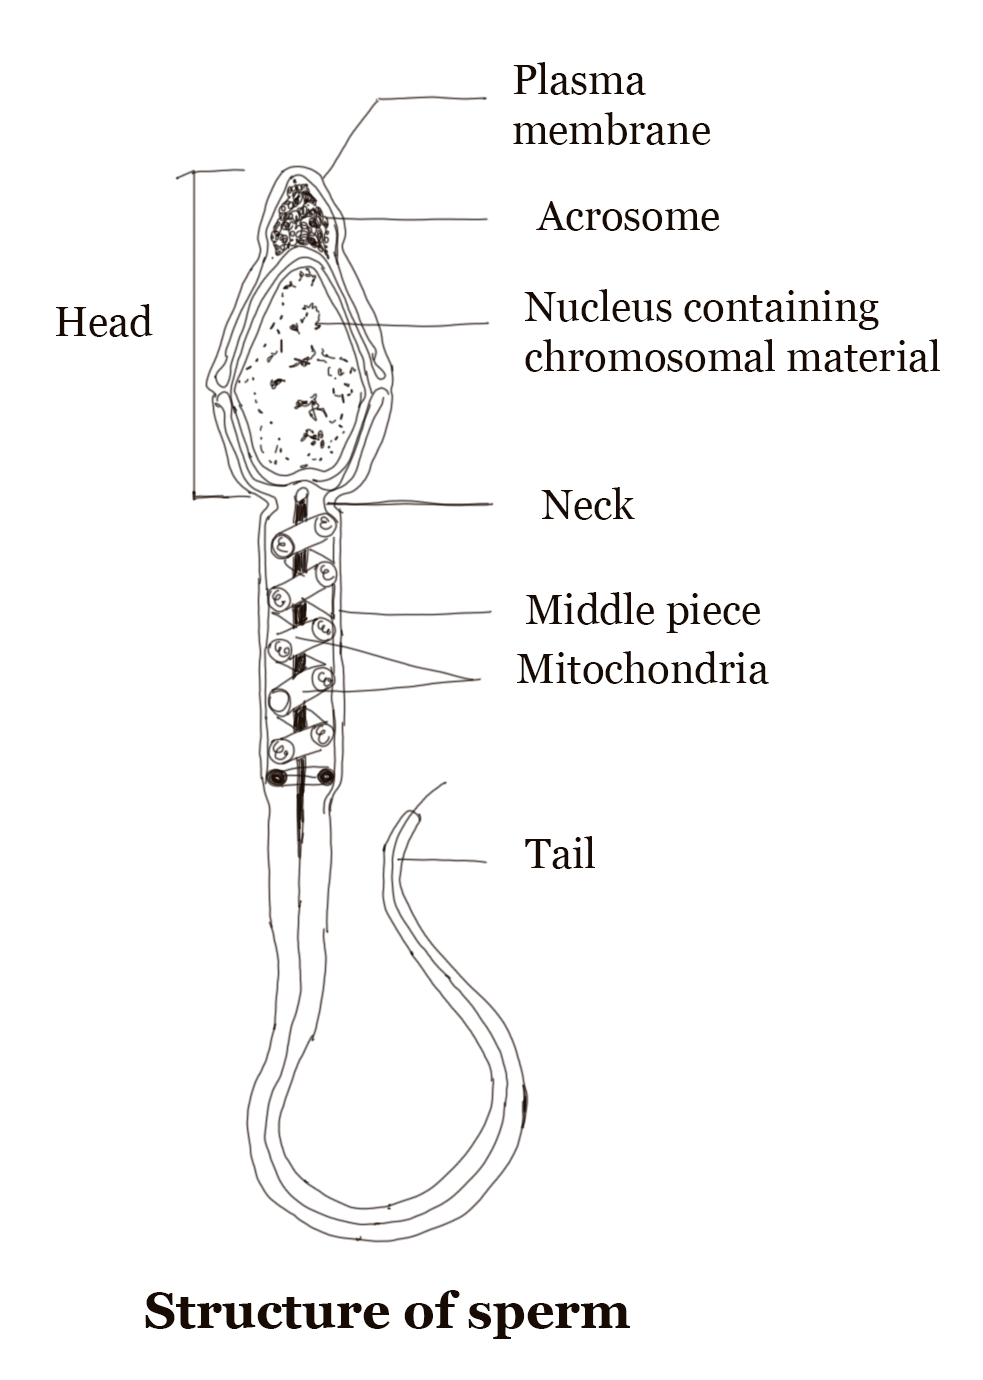 Function of a sperm cell